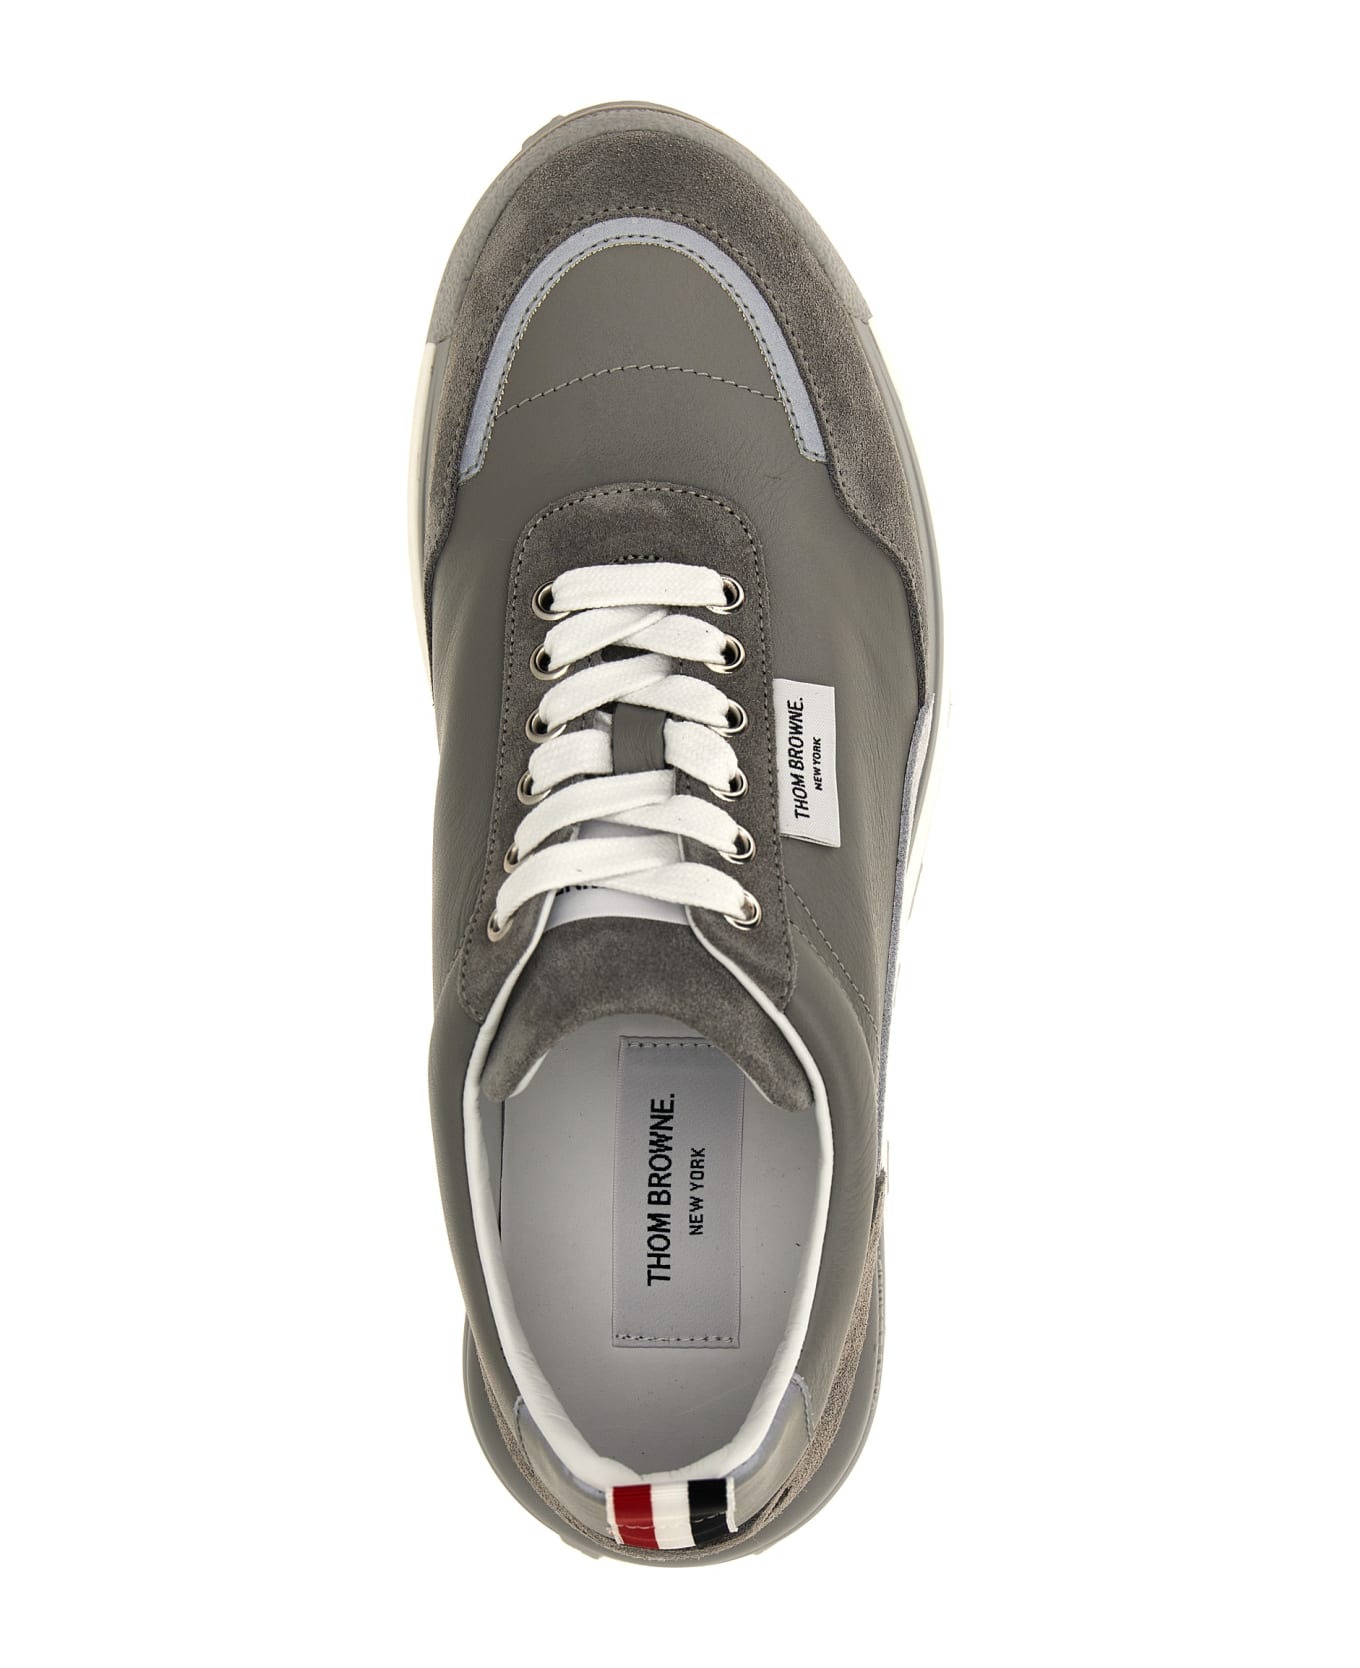 Thom Browne Sneaker With Logo - Total Grey スニーカー